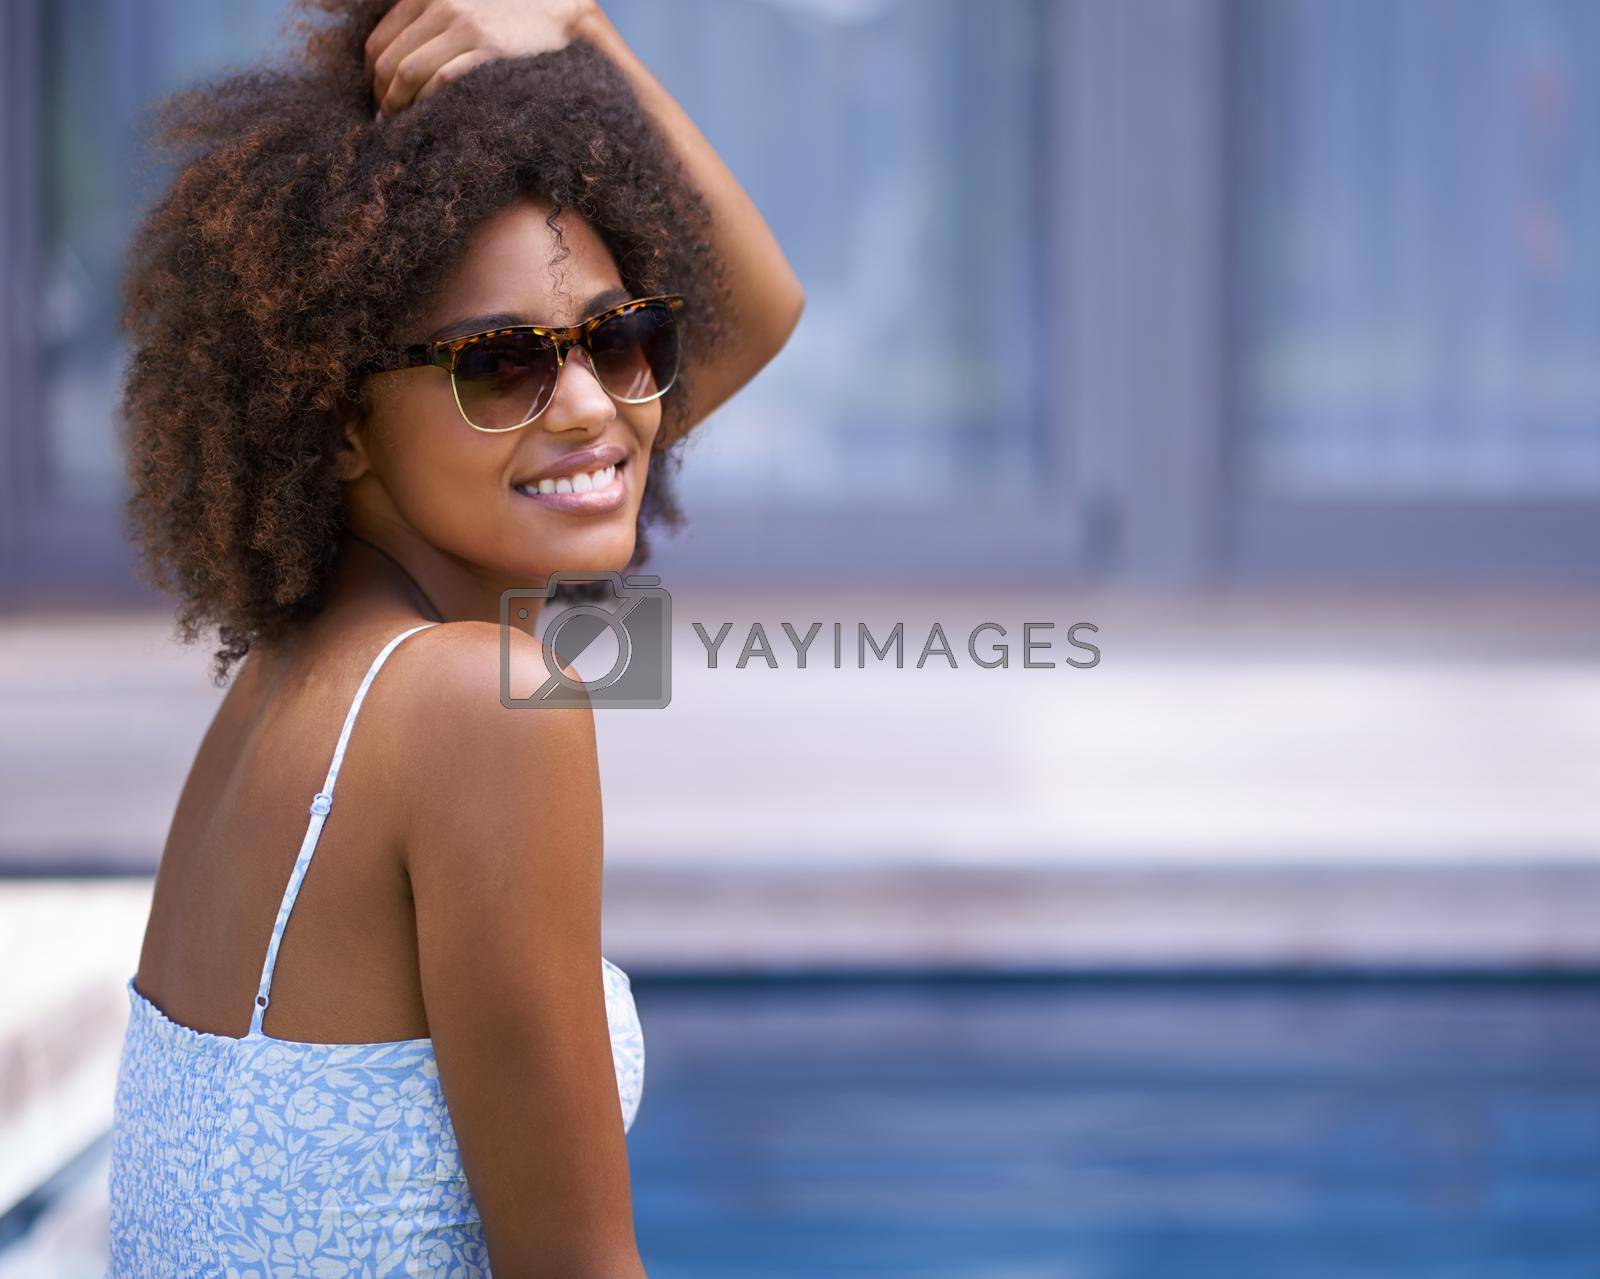 Royalty free image of Now this is what I call relaxation. Shot of an attractive ethnic woman posing in sunglasses by a pool. by YuriArcurs